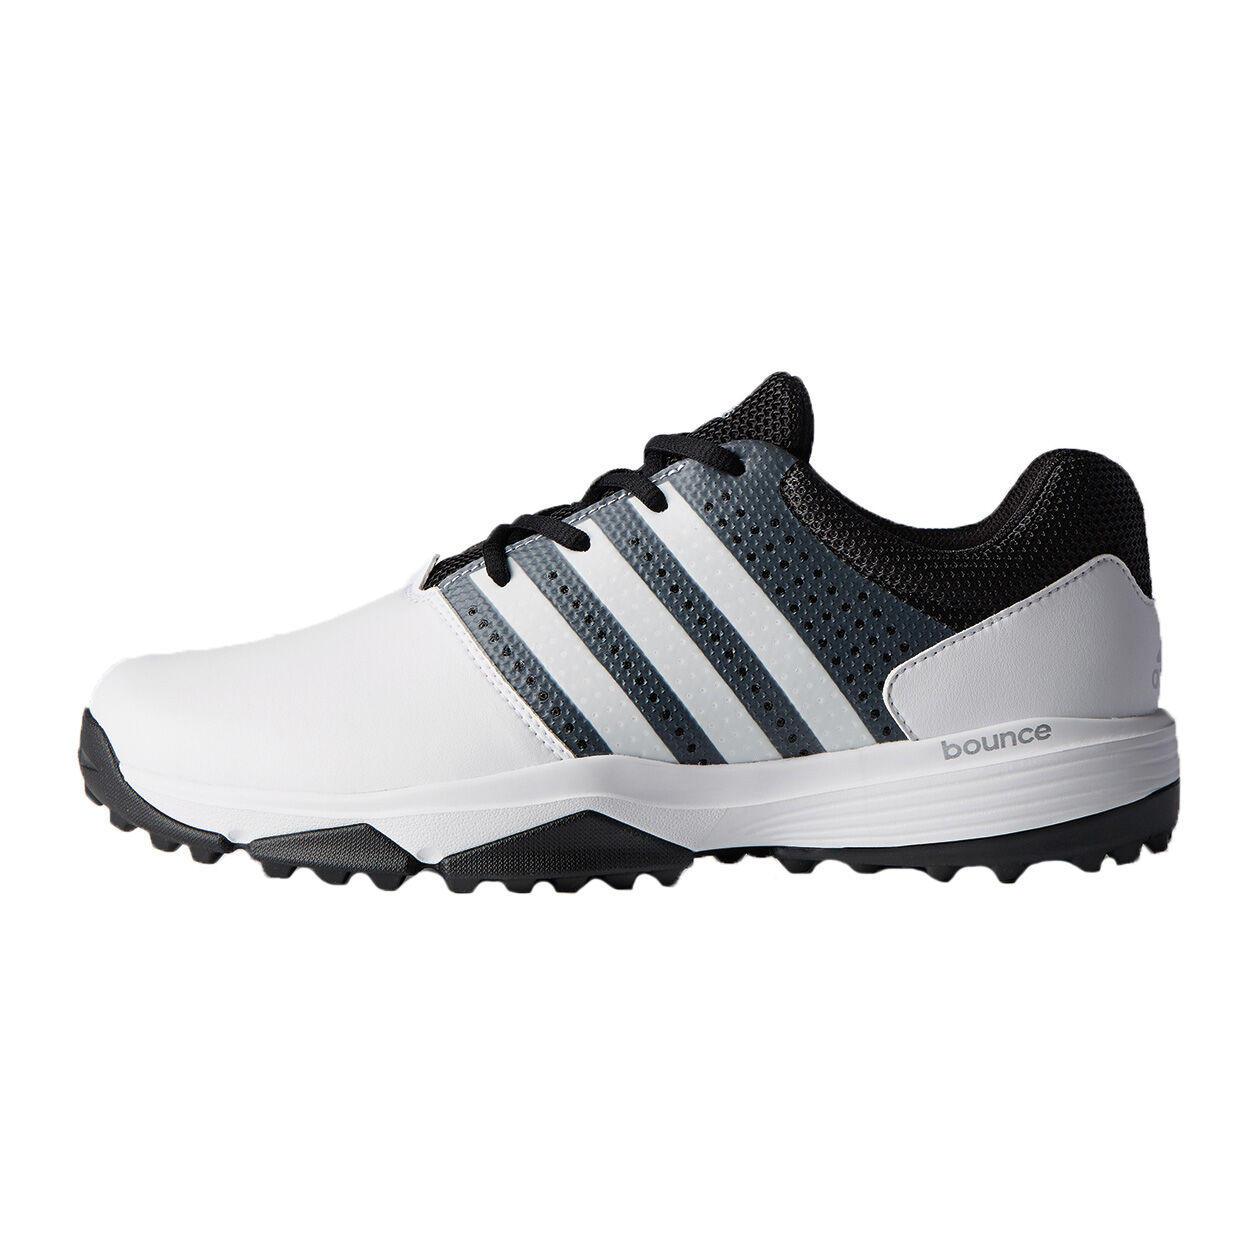 adidas 360 traxion bounce review